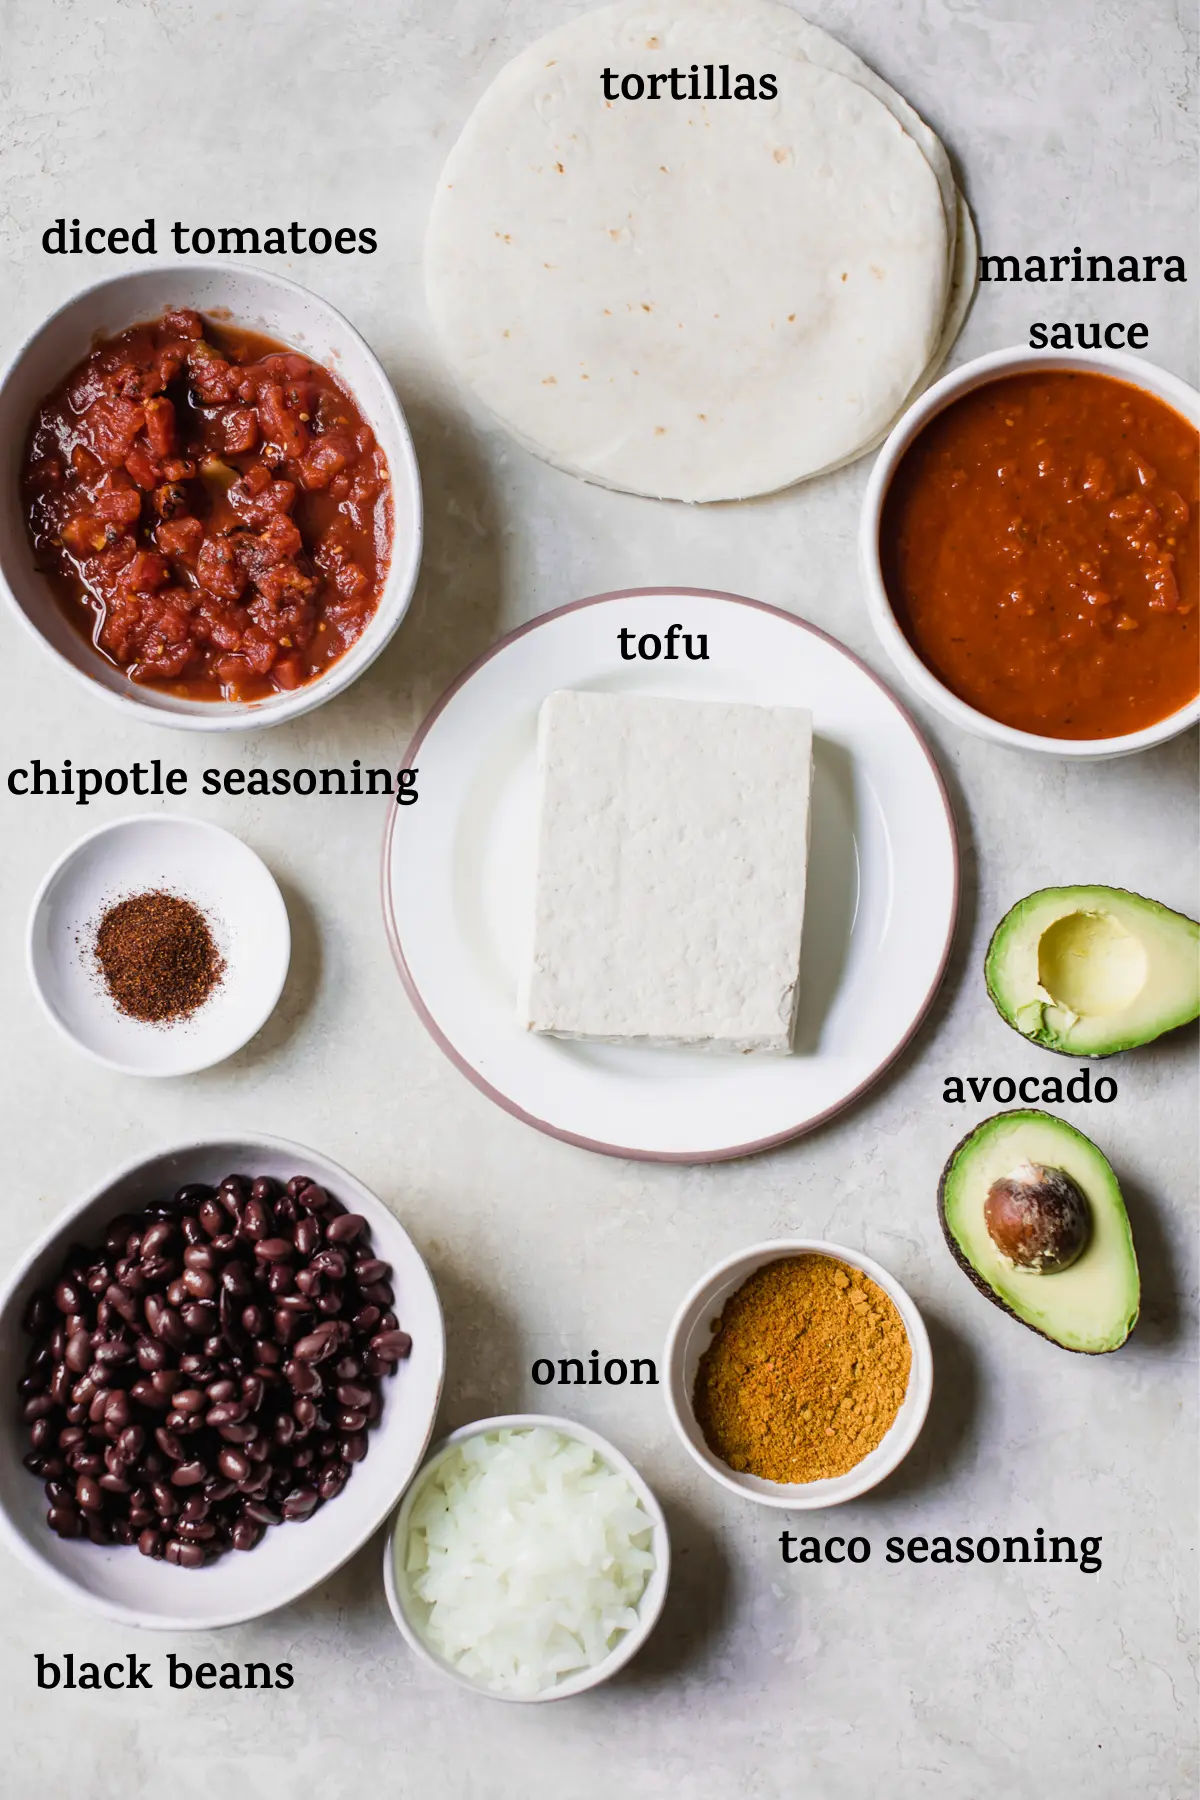 enchilada ingredients with text overlay